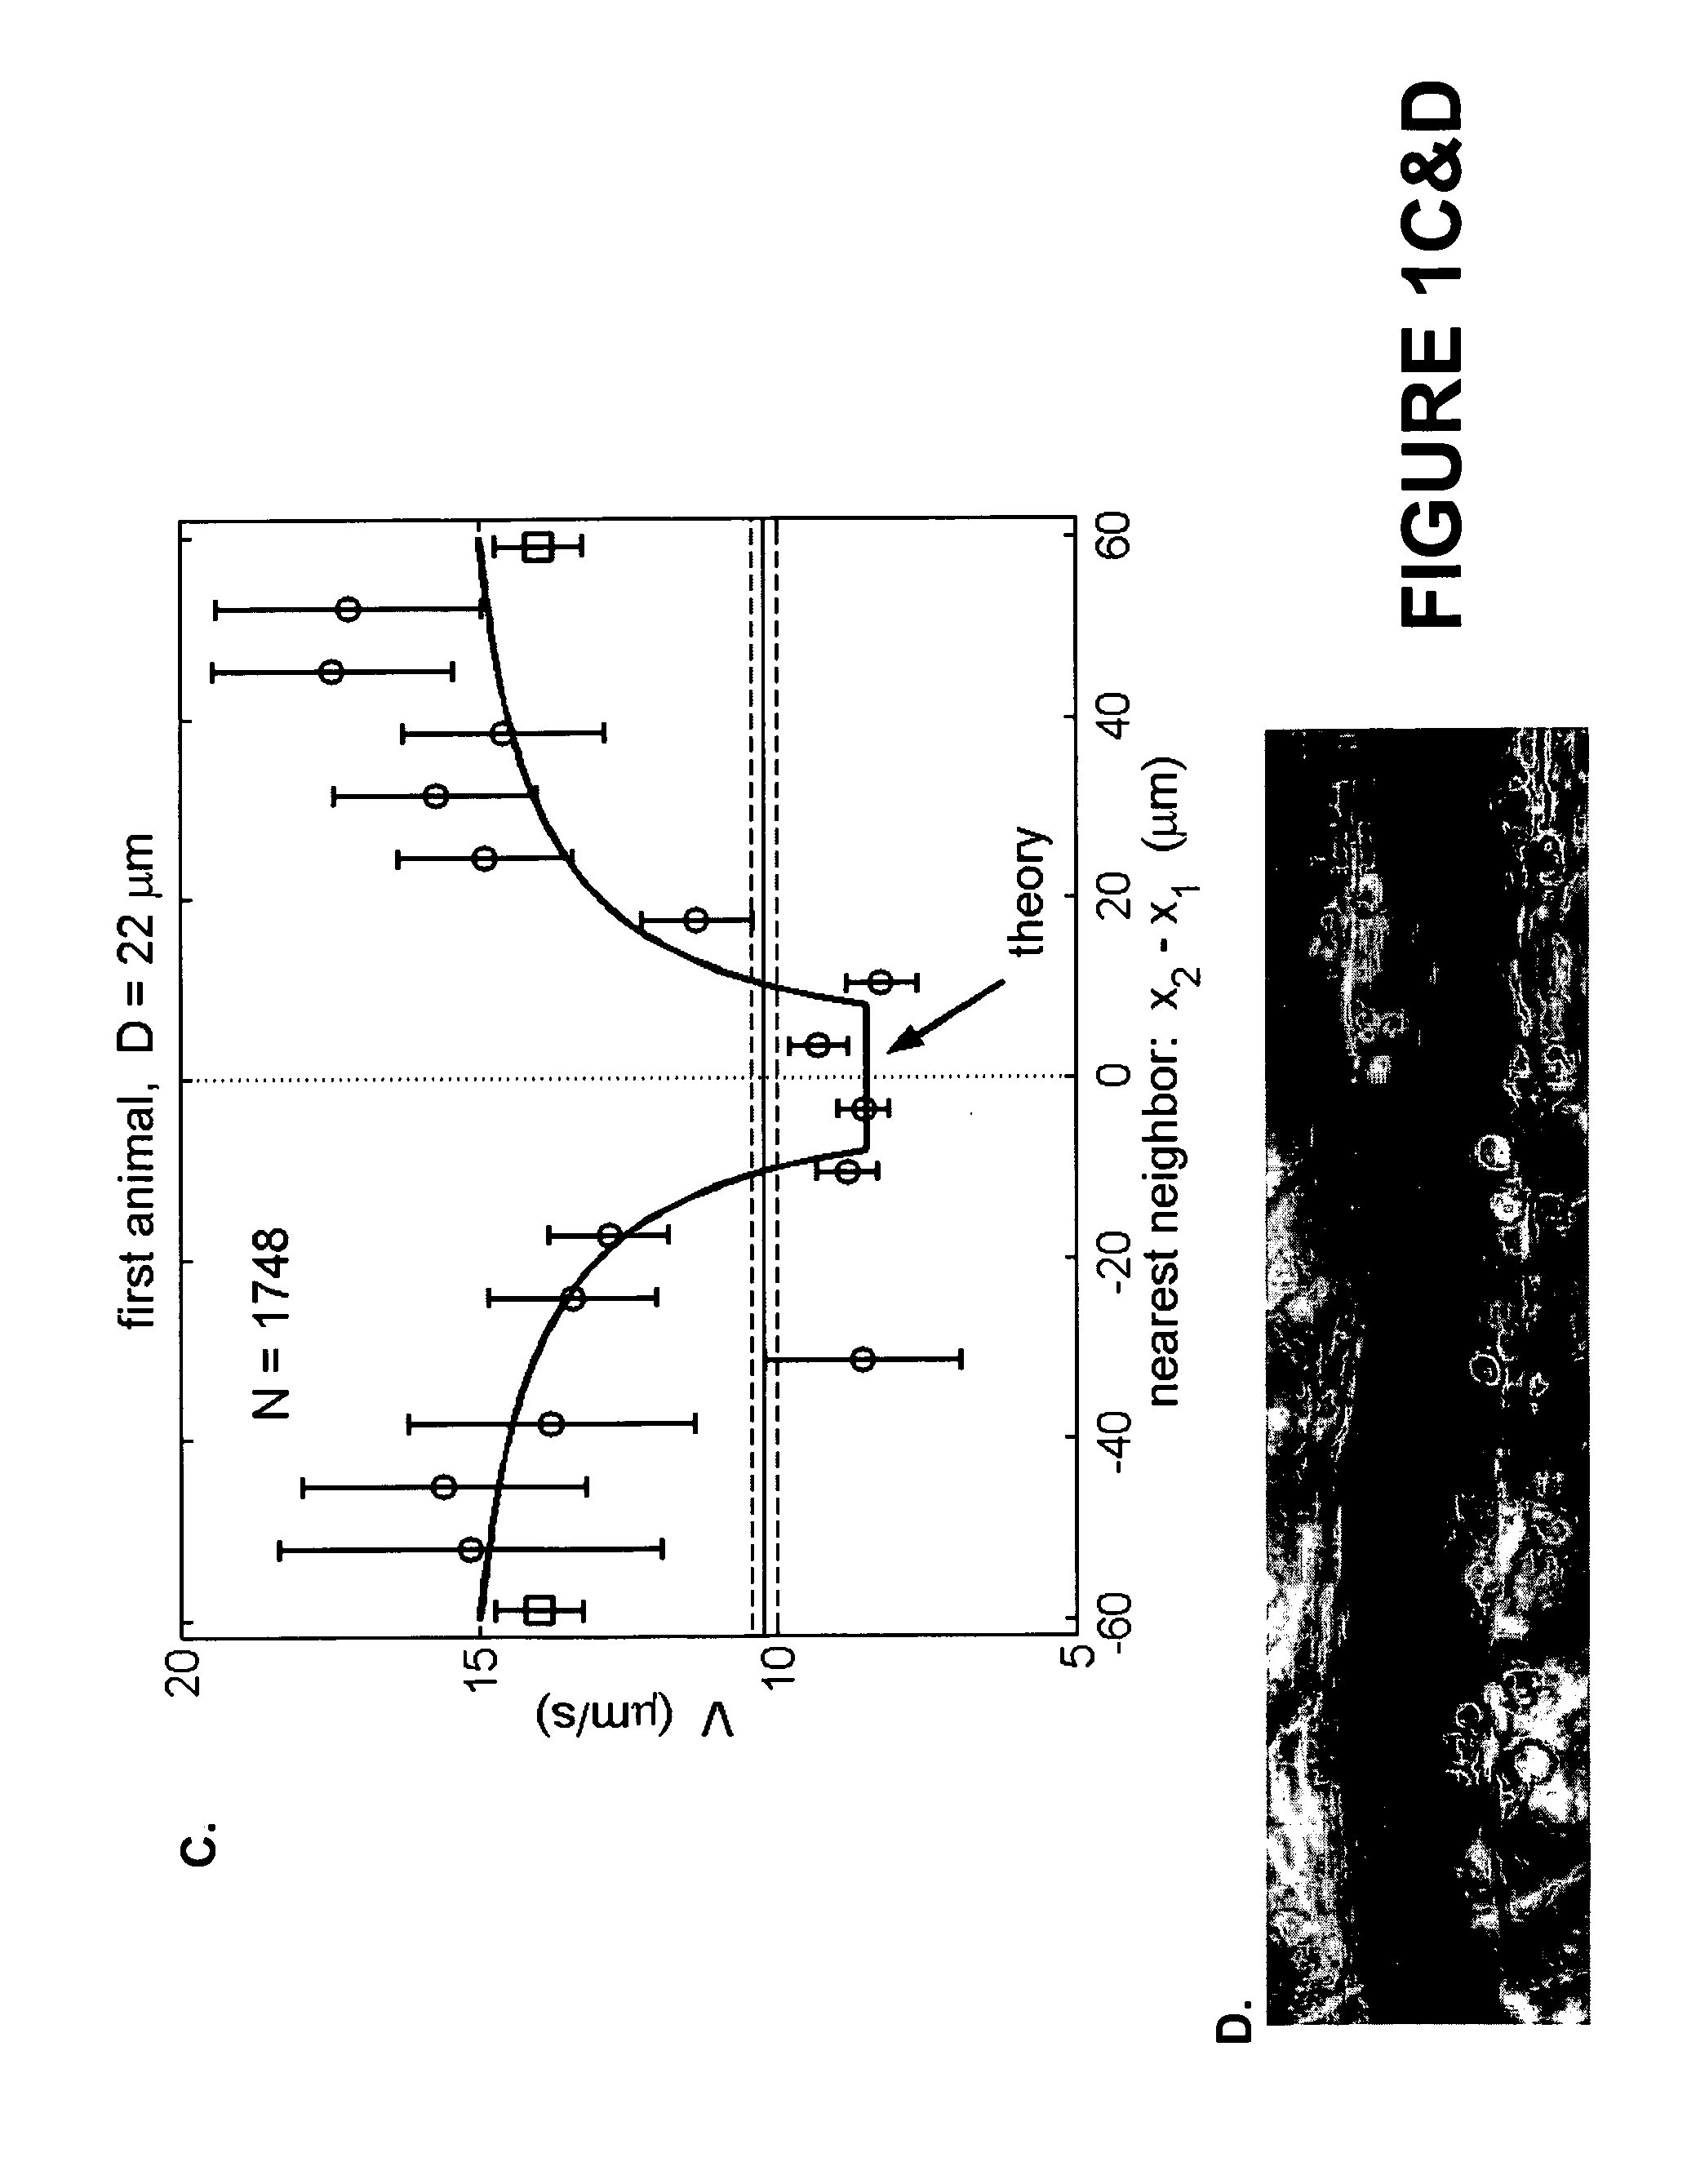 Continuous flow chamber device for separation, concentration, and/or purfication of cells